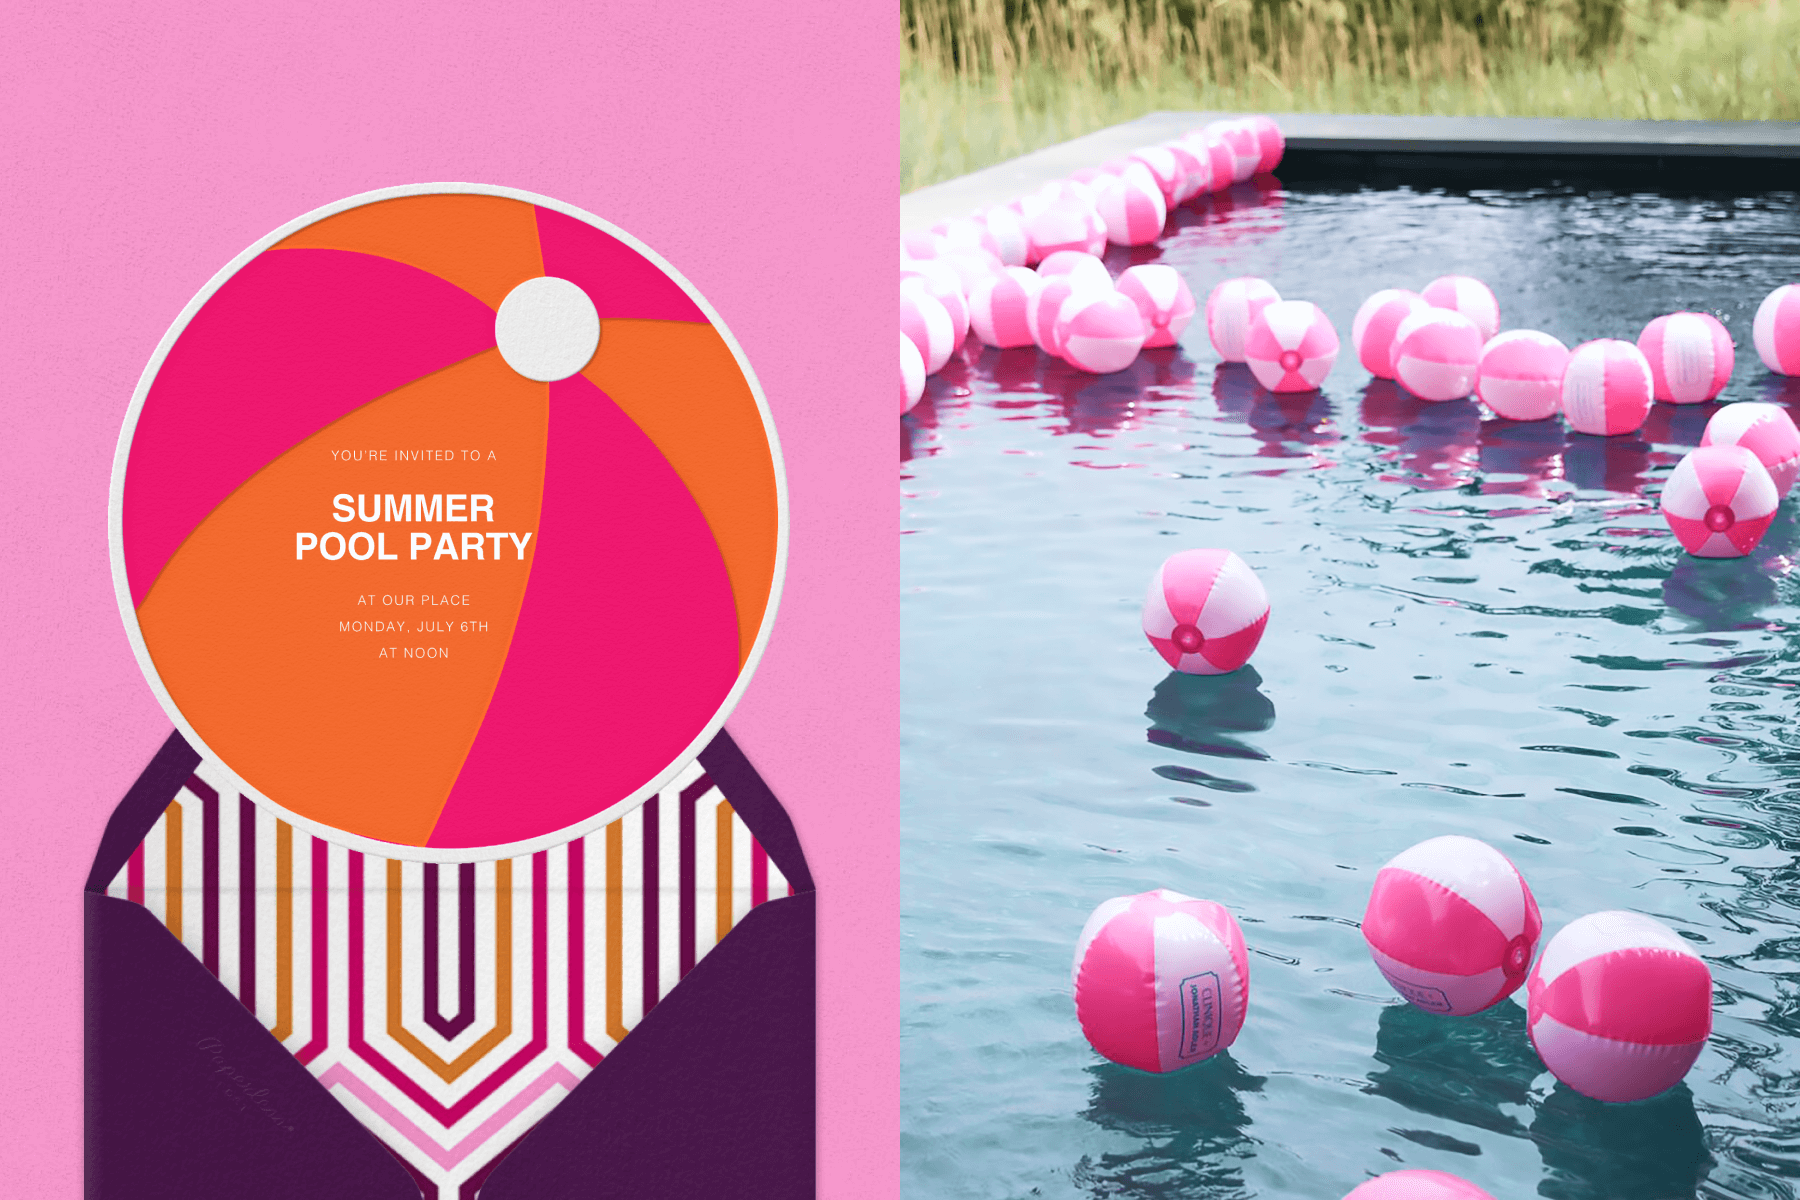 A pool party invitation shaped like a beach ball on a pink background; A pool full of pink and white beach balls. 